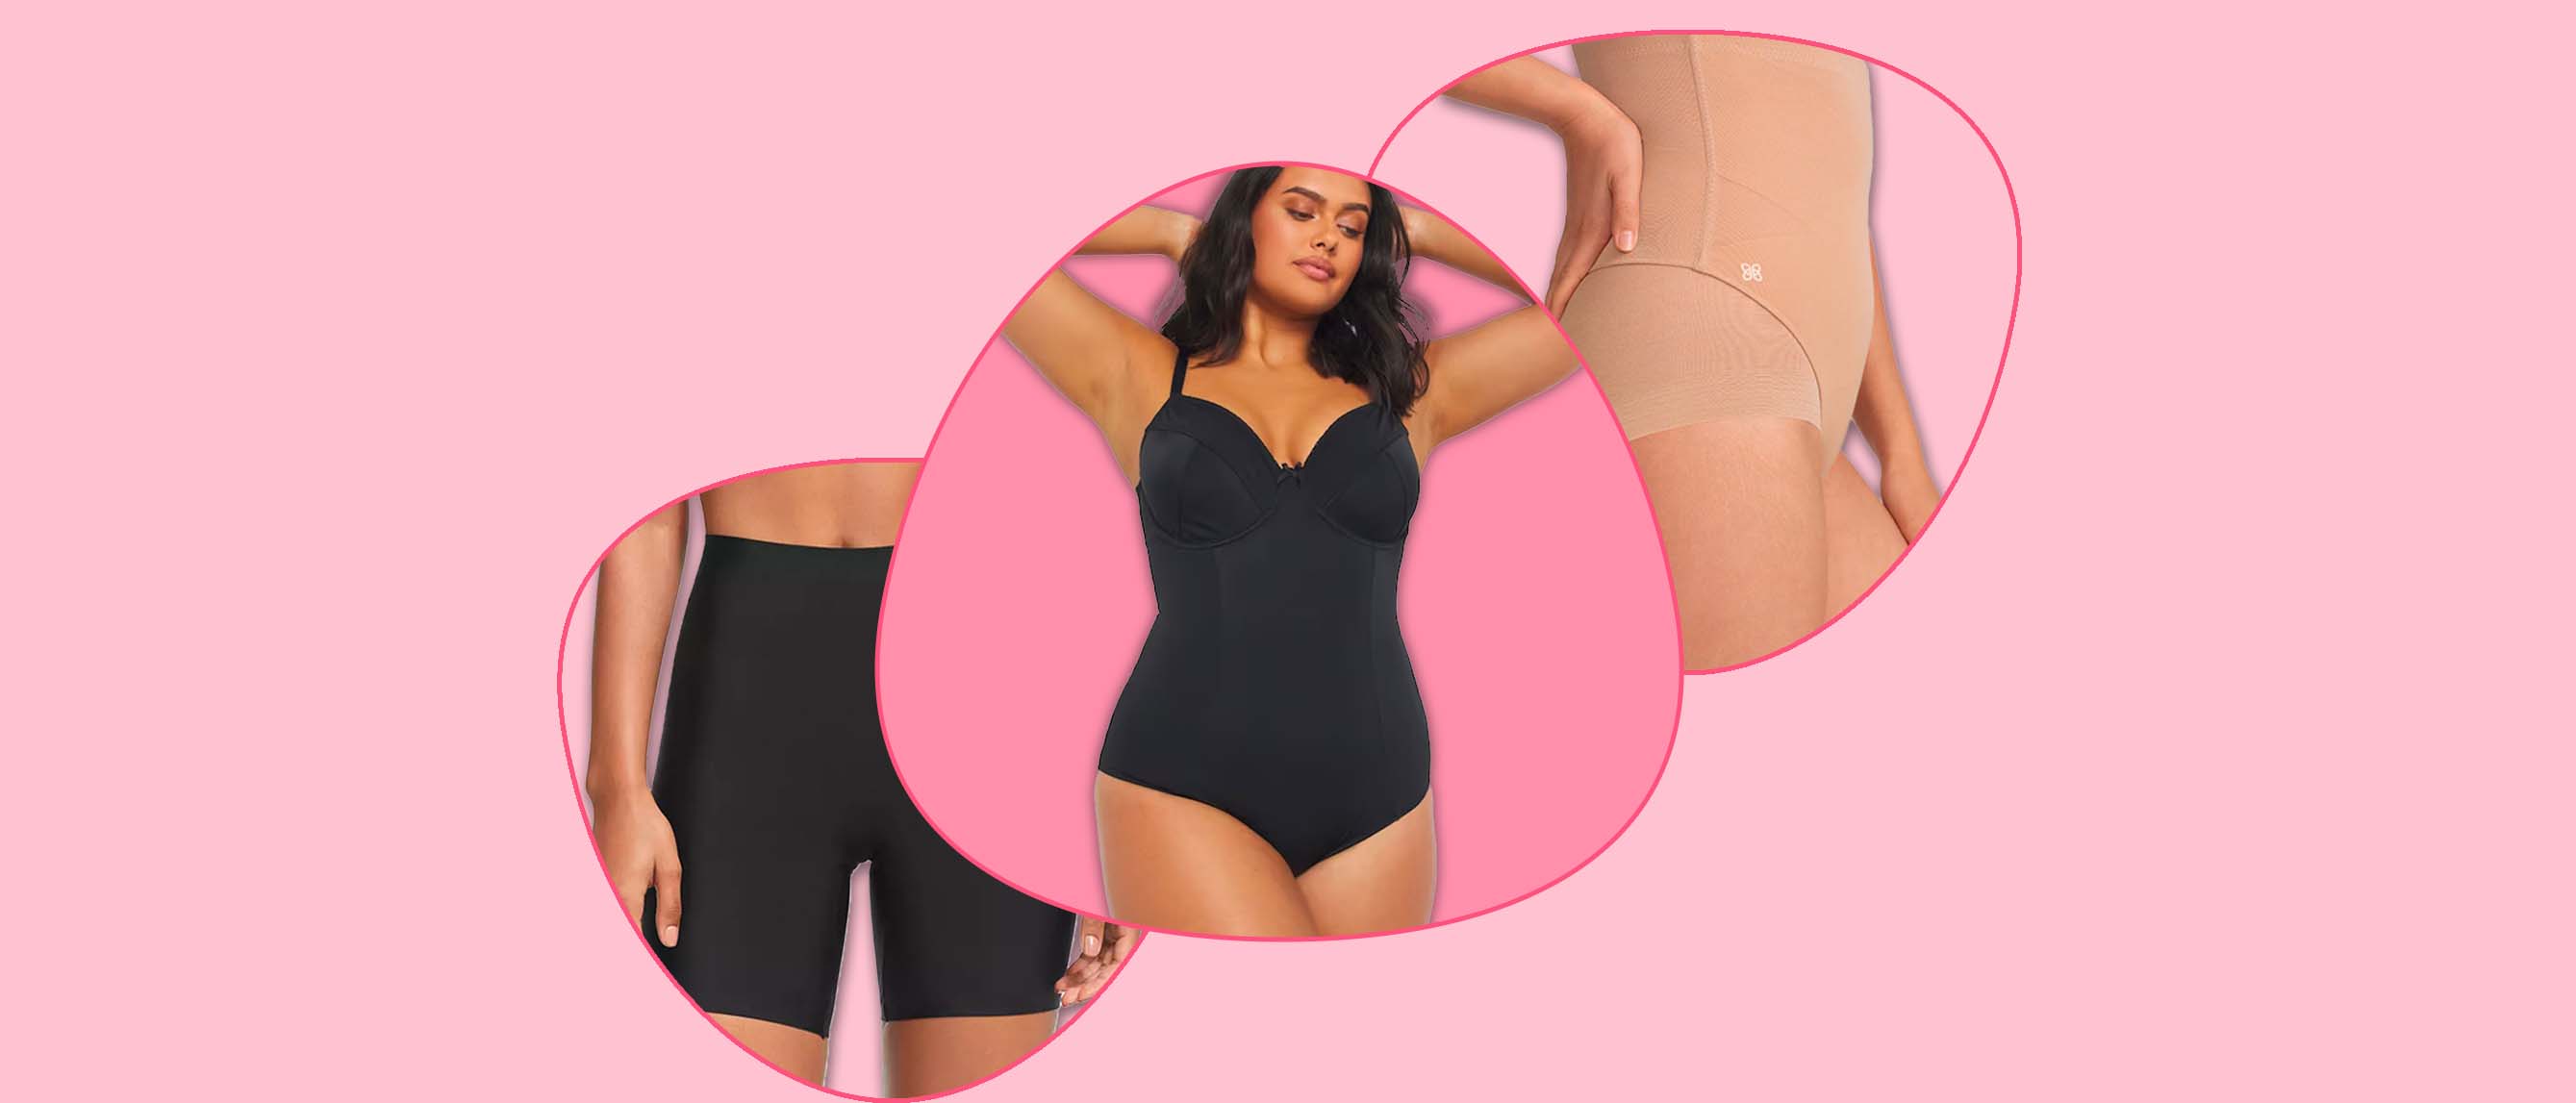 72 Shapewear Before and After ideas